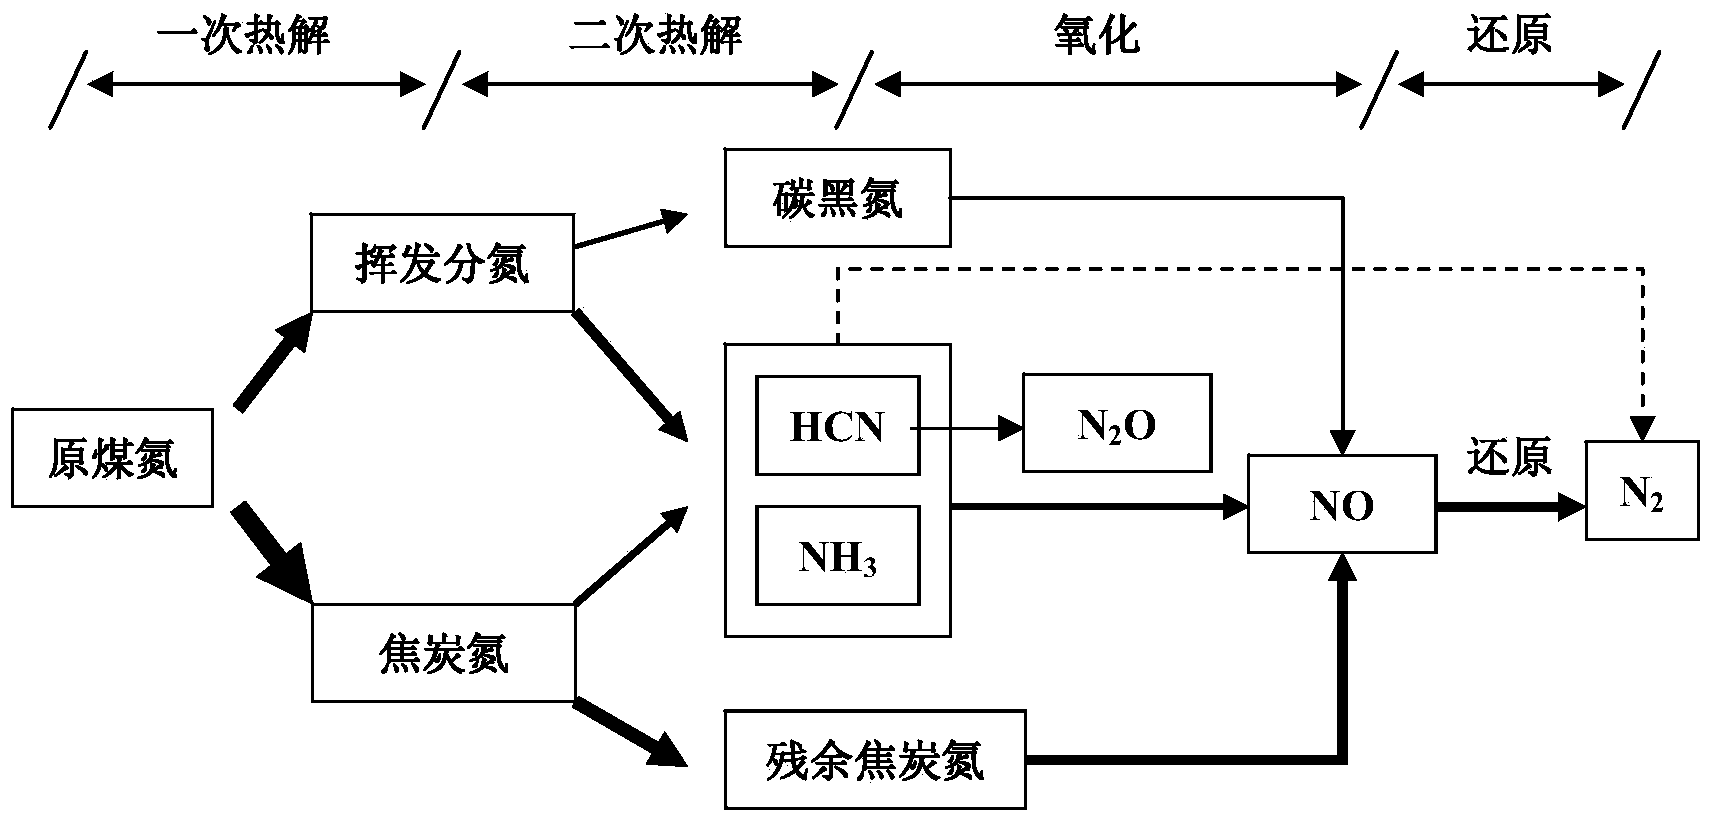 Low-nitrogen combustion control method and system based on secondary air door air regulation control